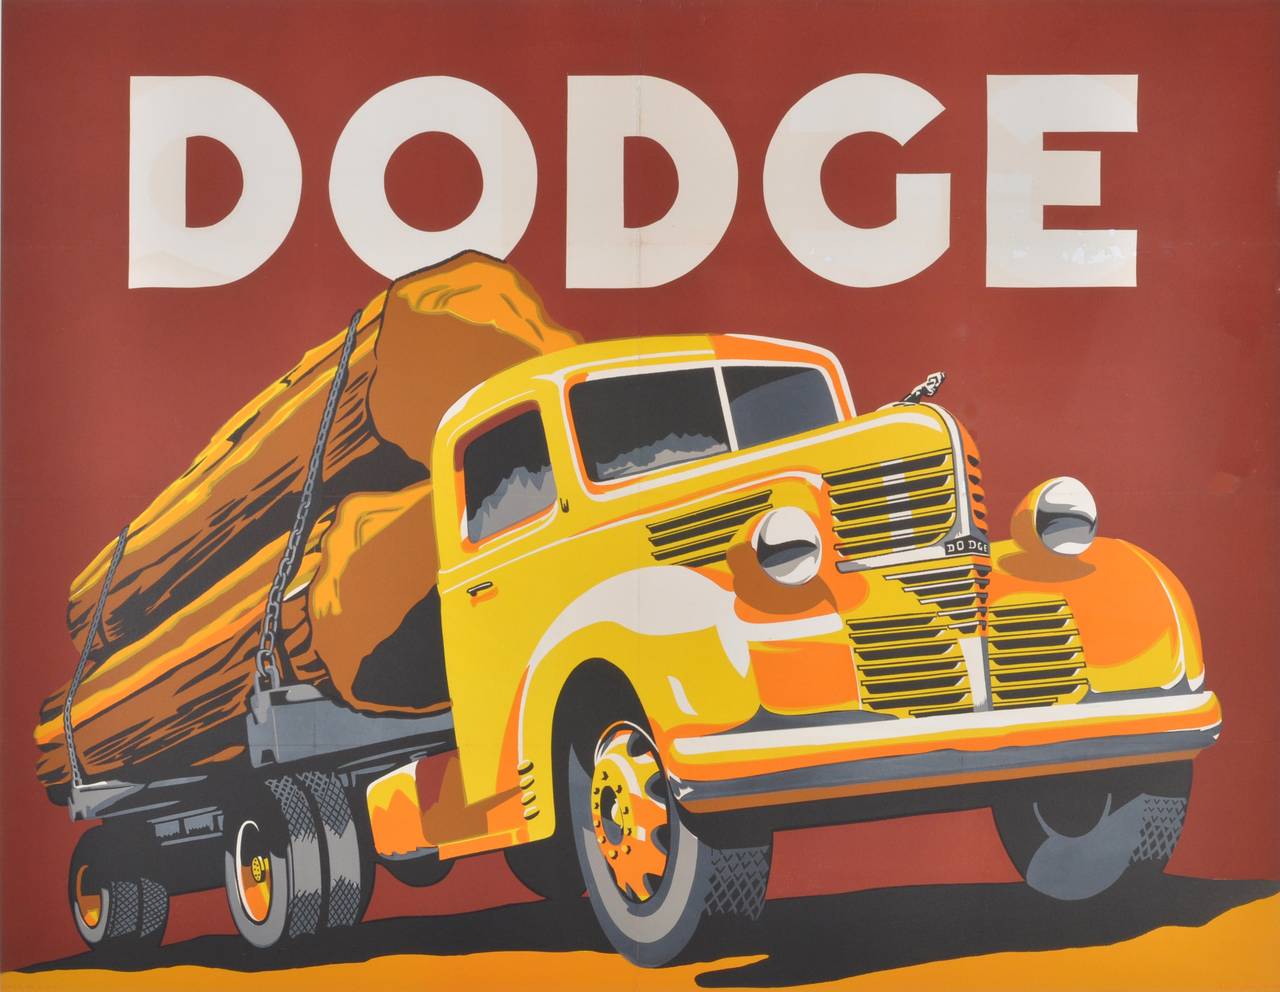 Unknown Nude Print - Original Vintage Advertising Poster Featuring A Dodge VC TD-21 Pickup Lug Truck